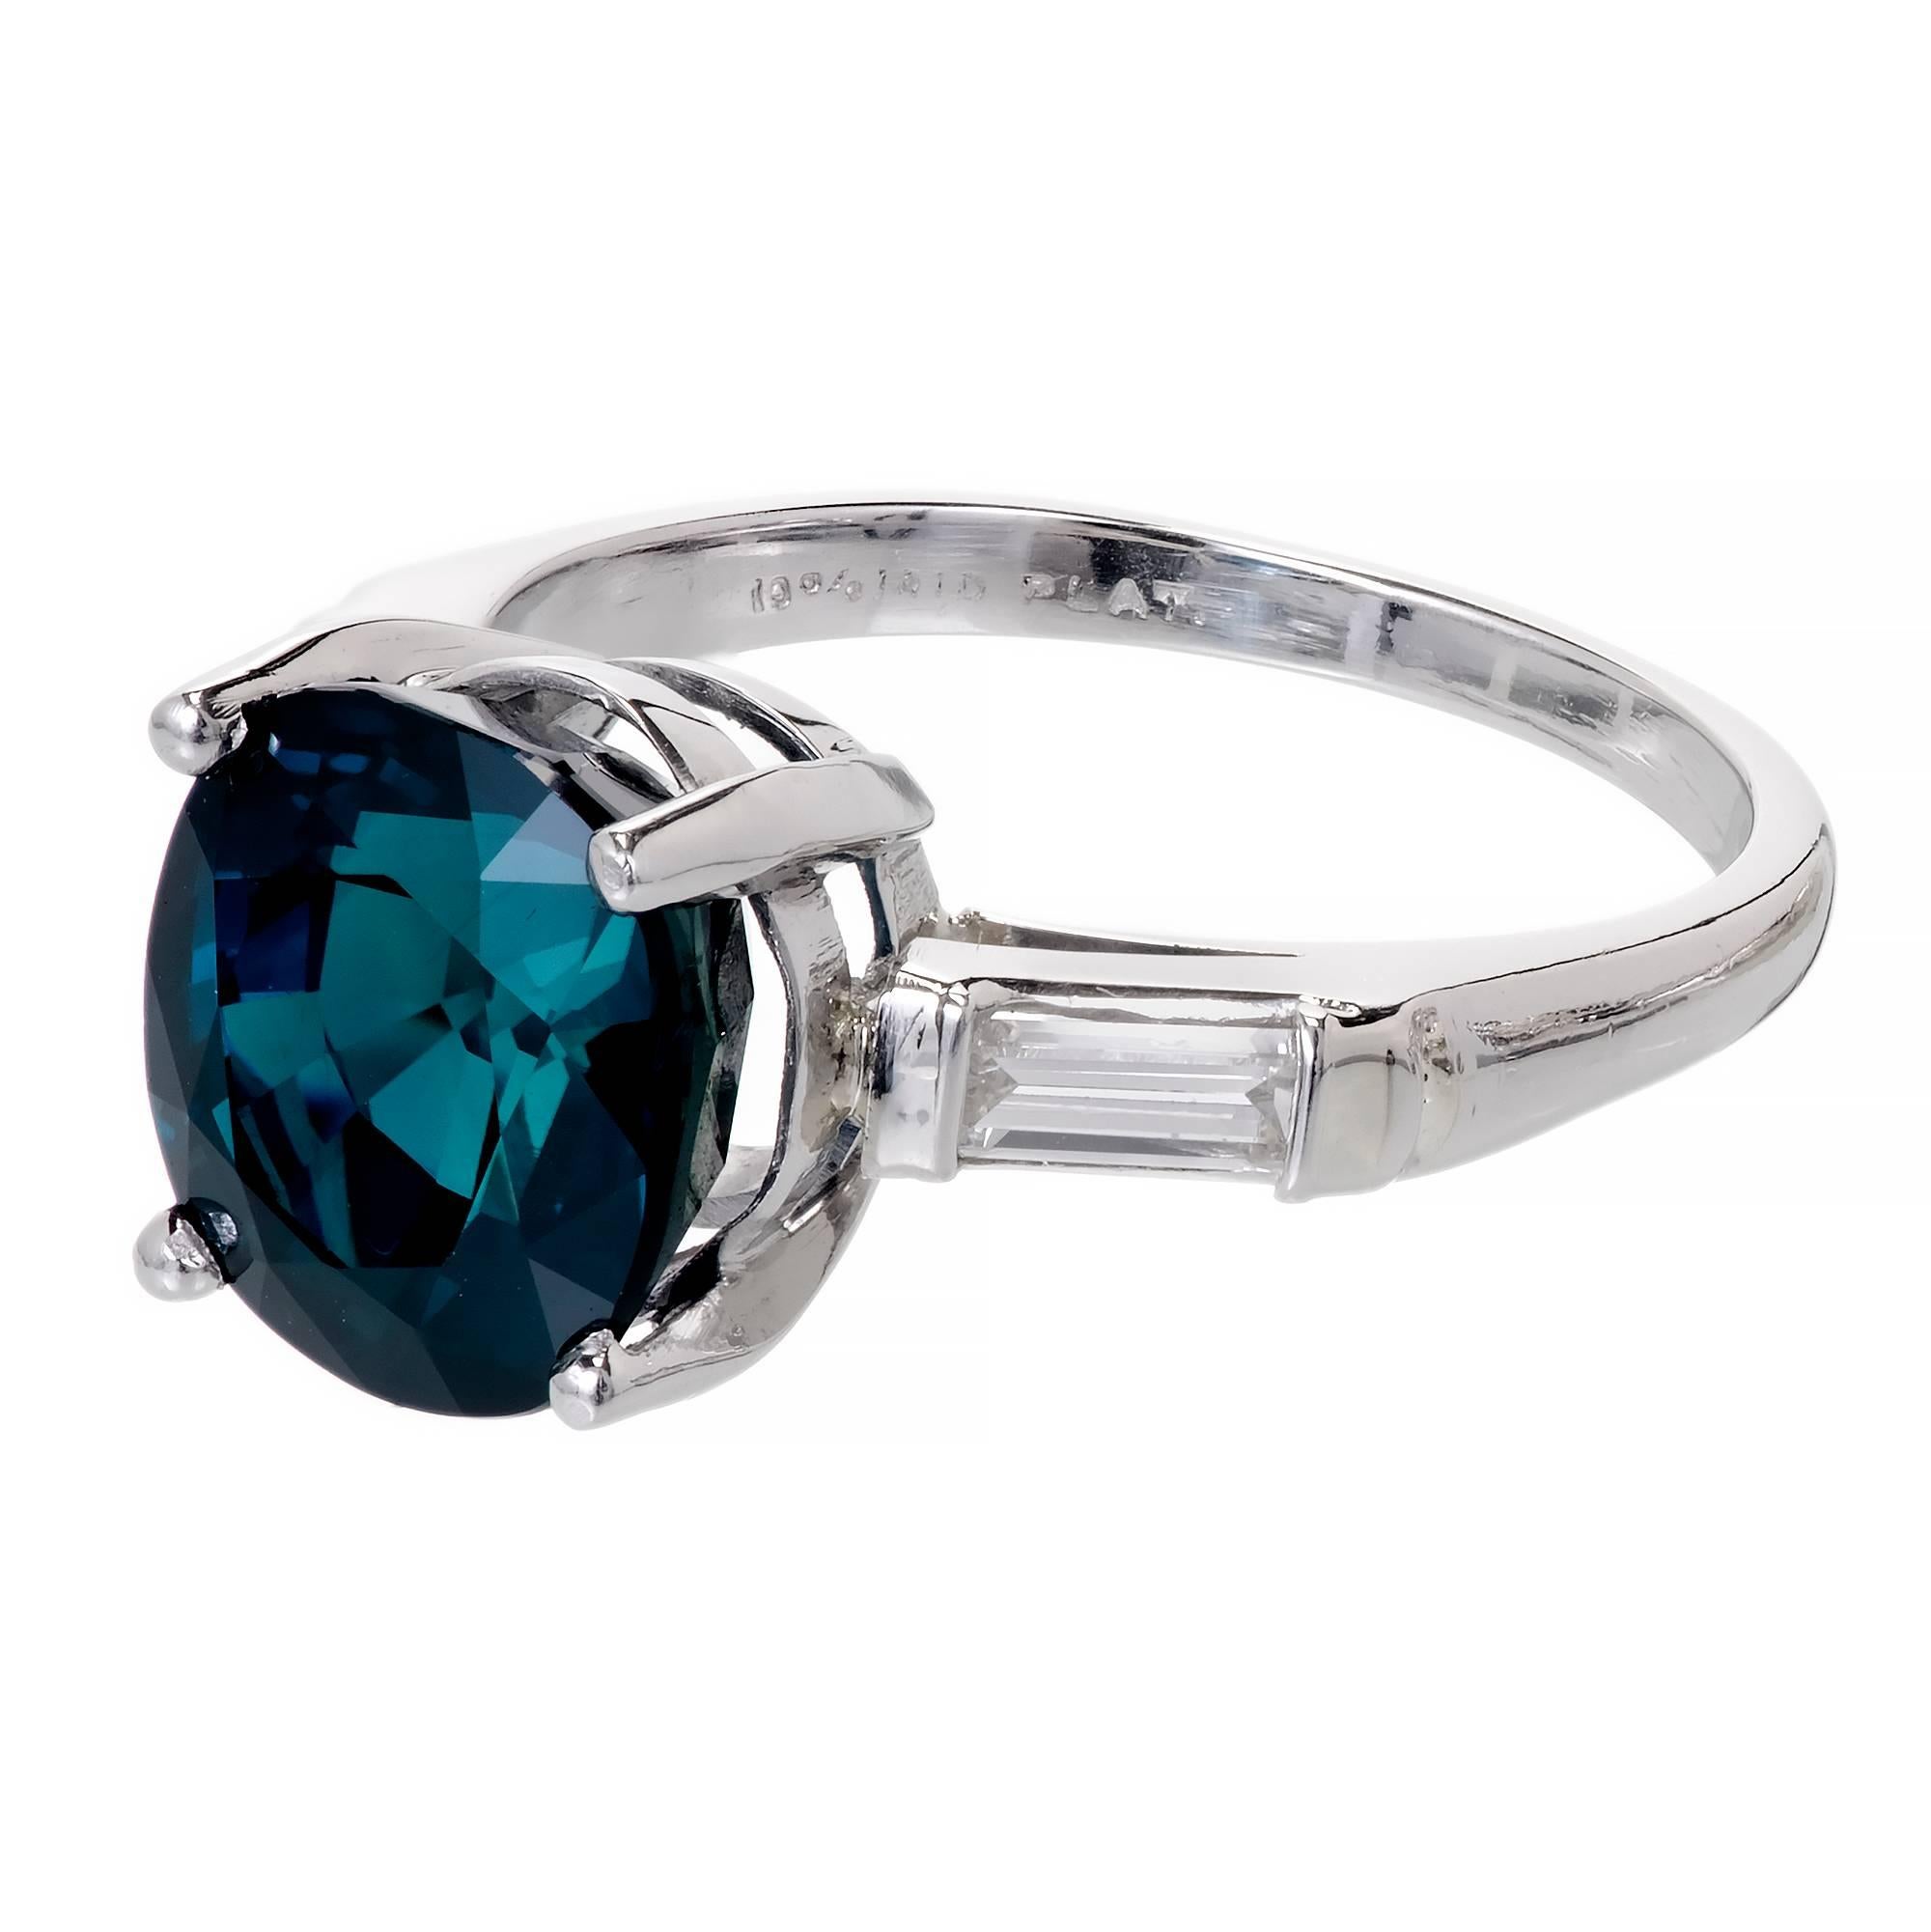 Vintage 1950-1960 6.07ct cushion cut Sapphire engagement ring with straight baguette accents in Platinum.  GIA certified natural corundum simple heat only.

1 cushion cut dark blue Sapphire, approx. total weight 6.07cts, VS2, 10.14 x 9.48 x 6.98mm,